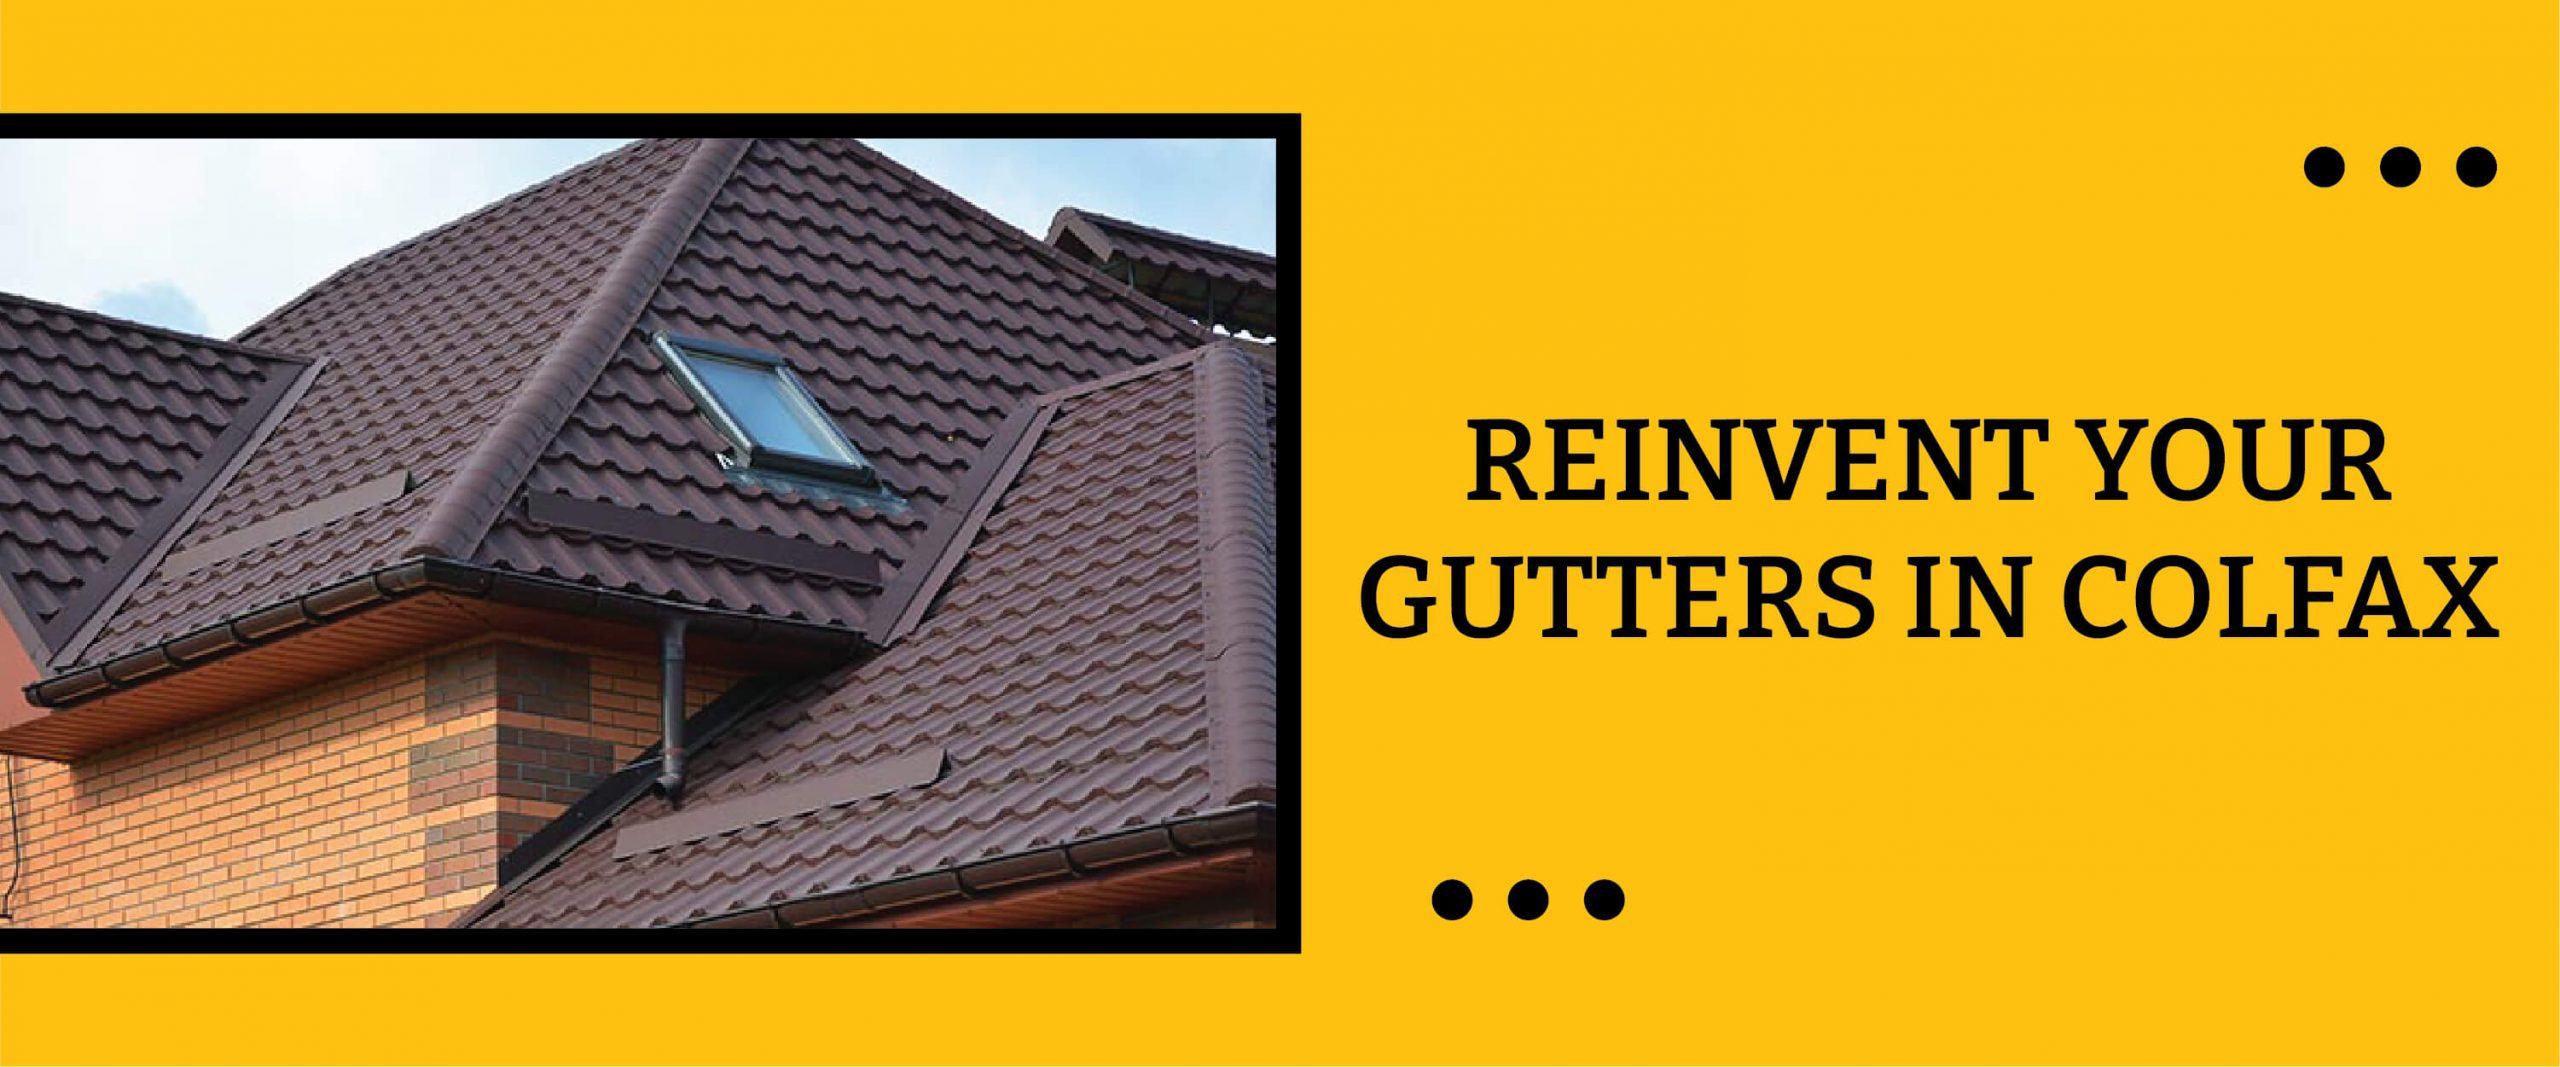 GUTTER SERVICES IN COLFAX